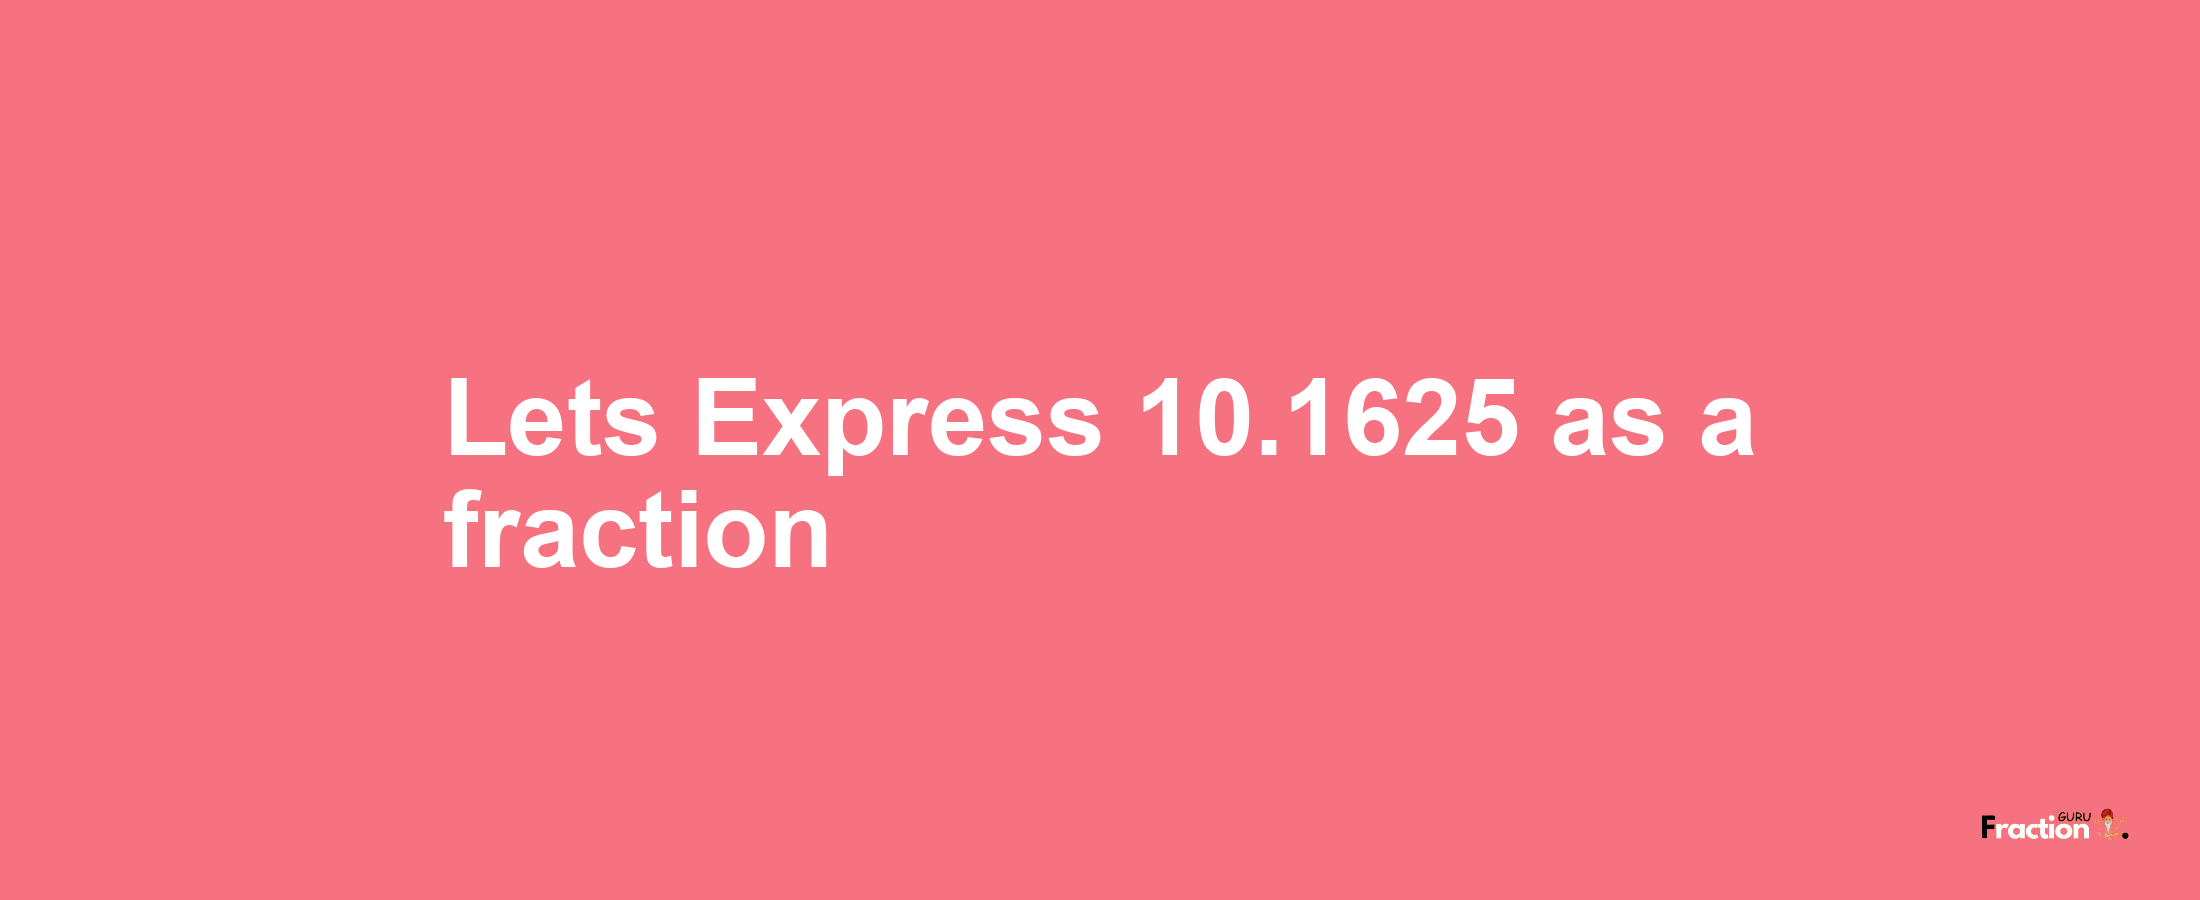 Lets Express 10.1625 as afraction